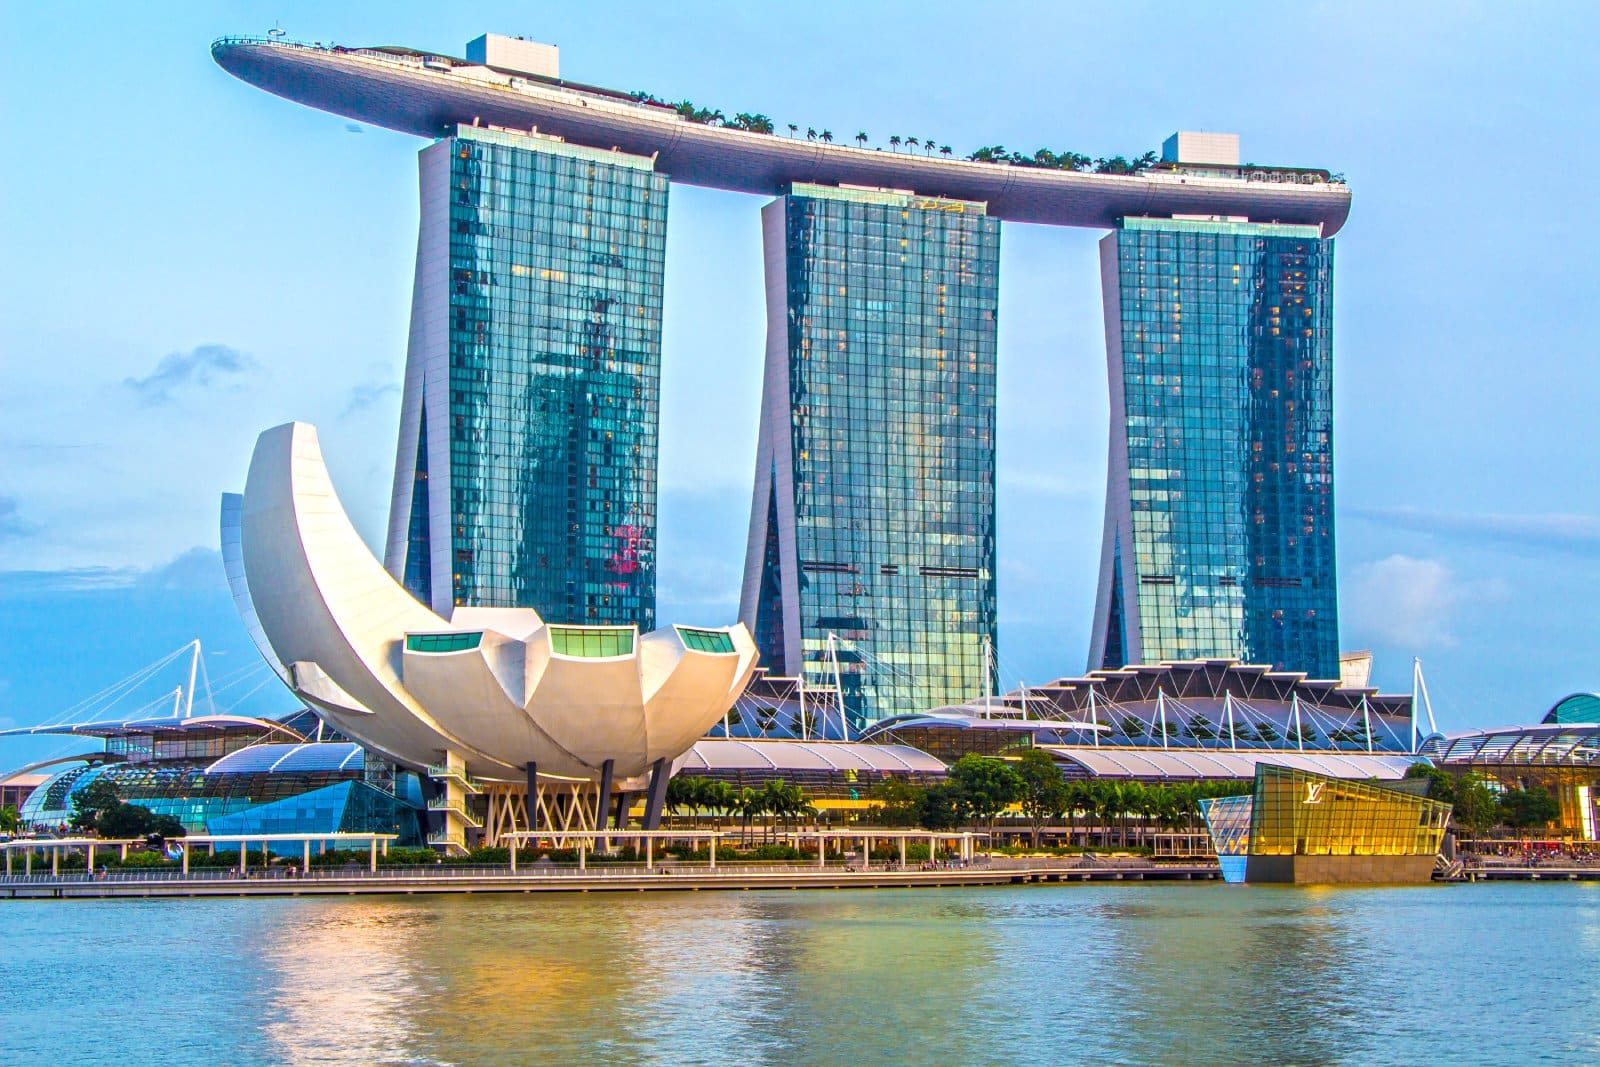 Image Credit: Shutterstock / Vichy Deal <p>Experience Singapore’s multicultural melting pot, with days filled with shopping in vibrant neighborhoods like Chinatown and Little India, and evenings dining on street food at hawker centers or fine dining at Michelin-starred restaurants. Embrace the city-state’s green initiatives with visits to urban parks, rooftop gardens, and nature reserves showcasing Singapore’s biodiversity.</p>